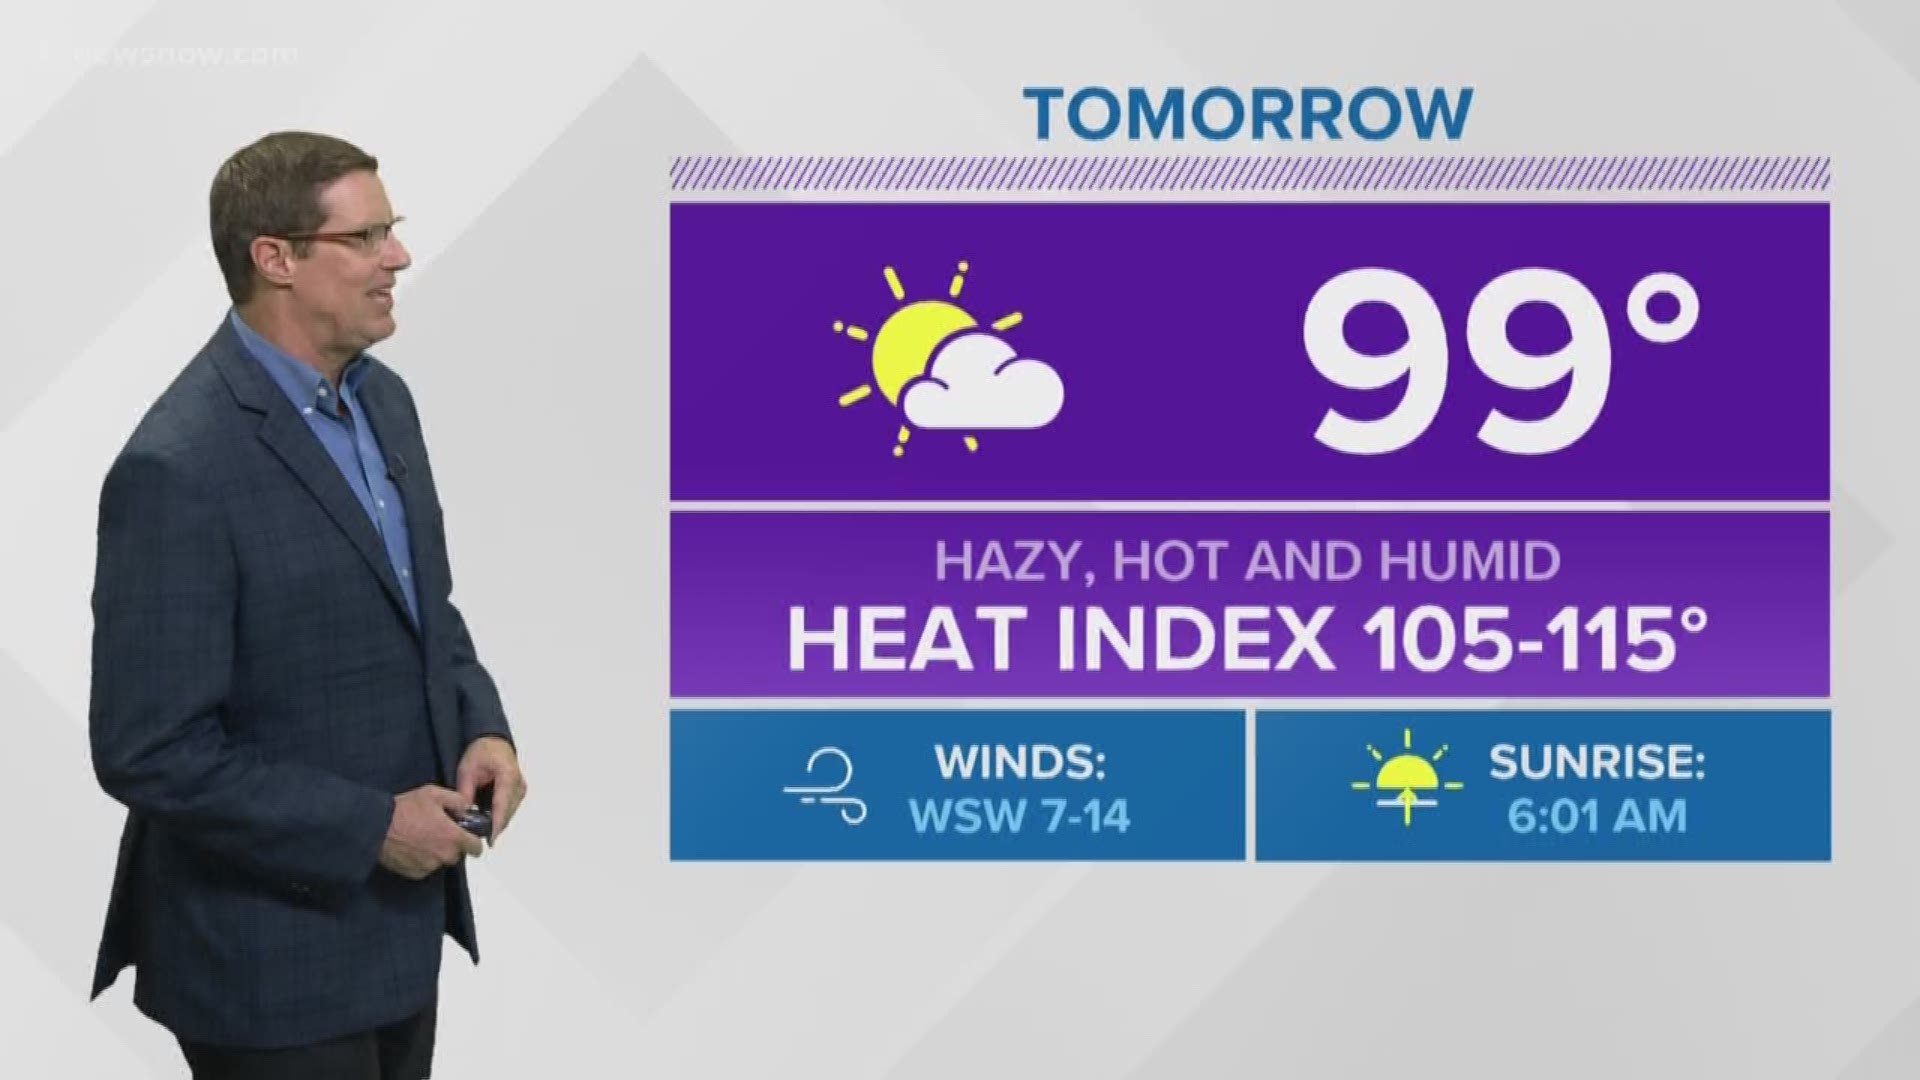 Chief Meteorologist Jeff Lawson brings you the forecast from the Weather Authority